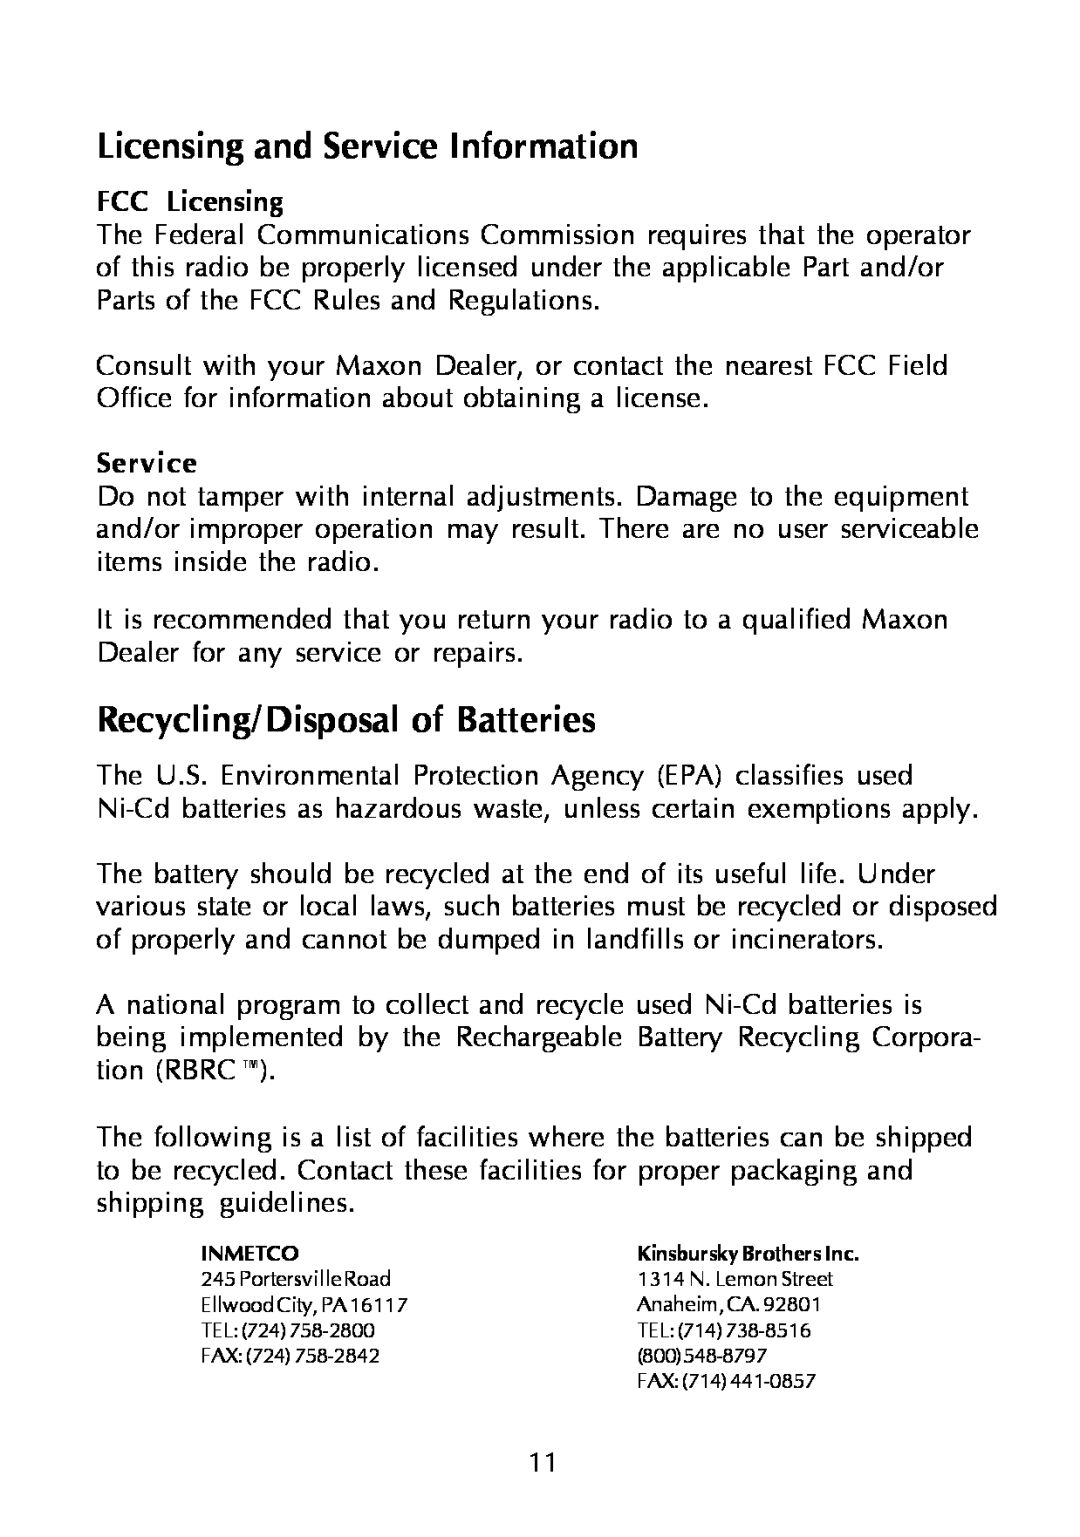 Maxon Telecom SP-320, SP-330 & SP-340 Licensing and Service Information, Recycling/Disposal of Batteries, FCC Licensing 